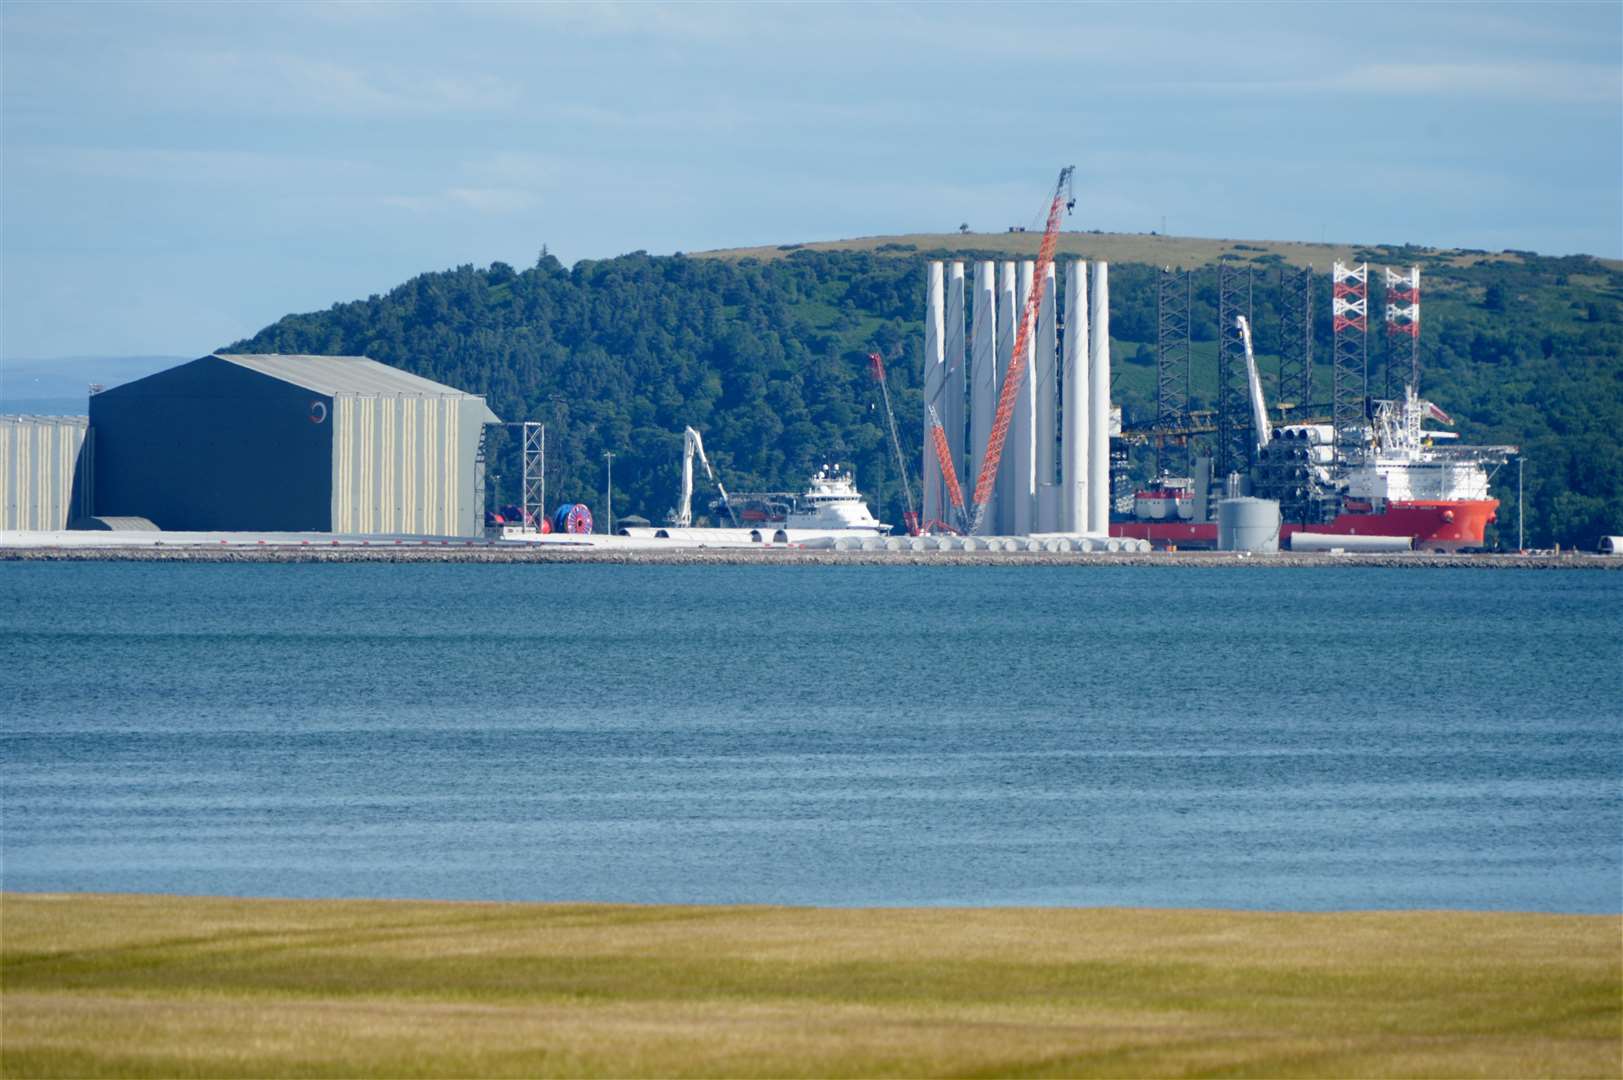 Port of Nigg with giant wind turbines for the Beatrice offshore wind farm.